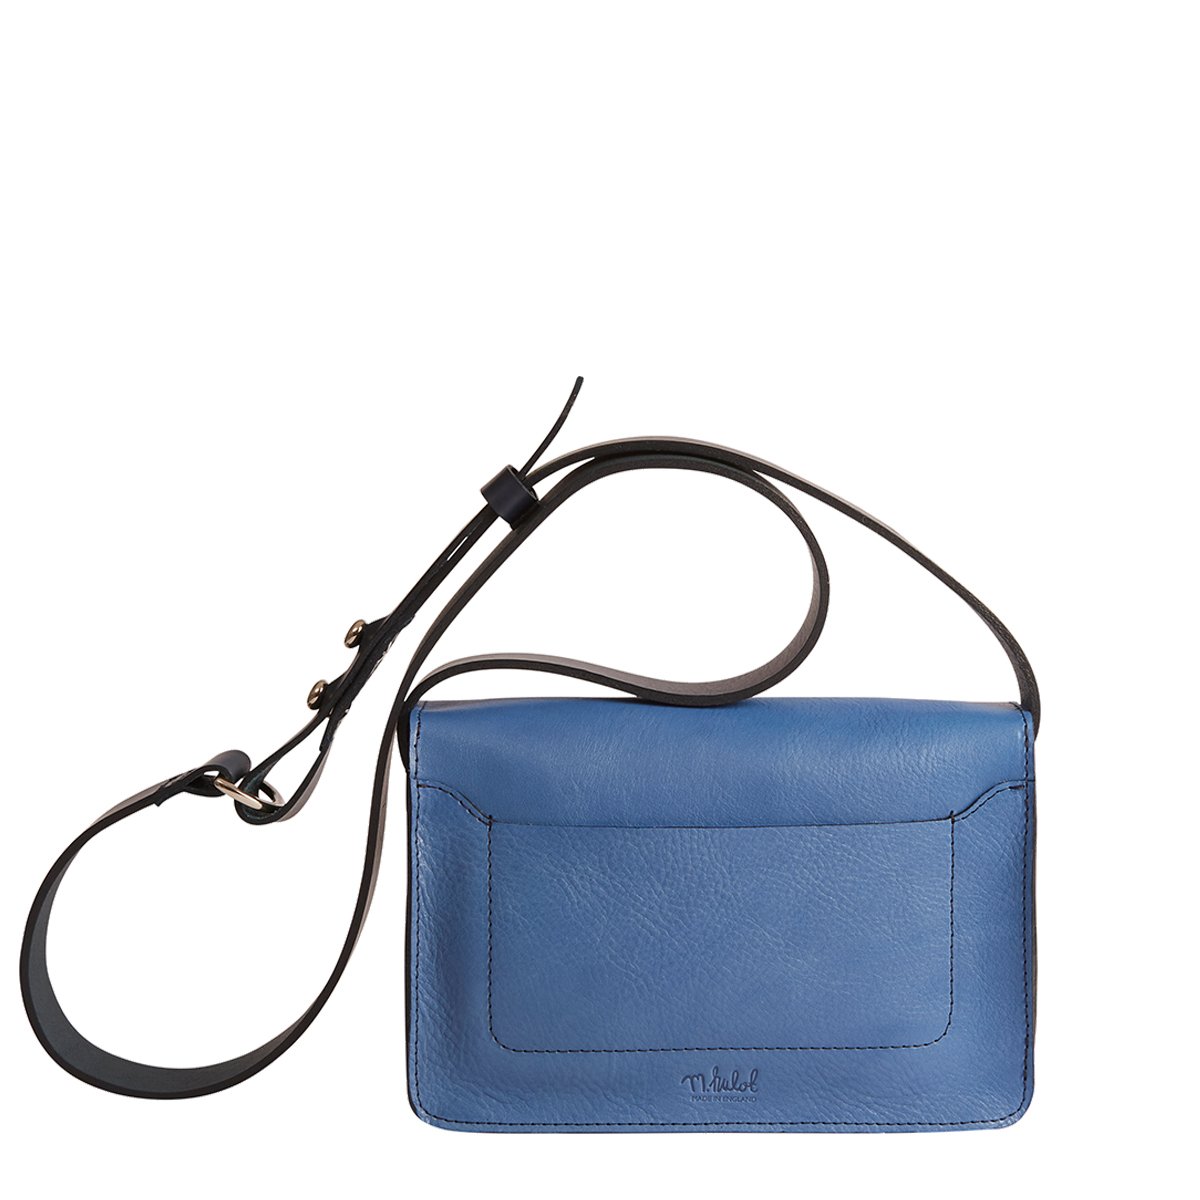 Classic Leather Satchel in cobalt blue — hedge